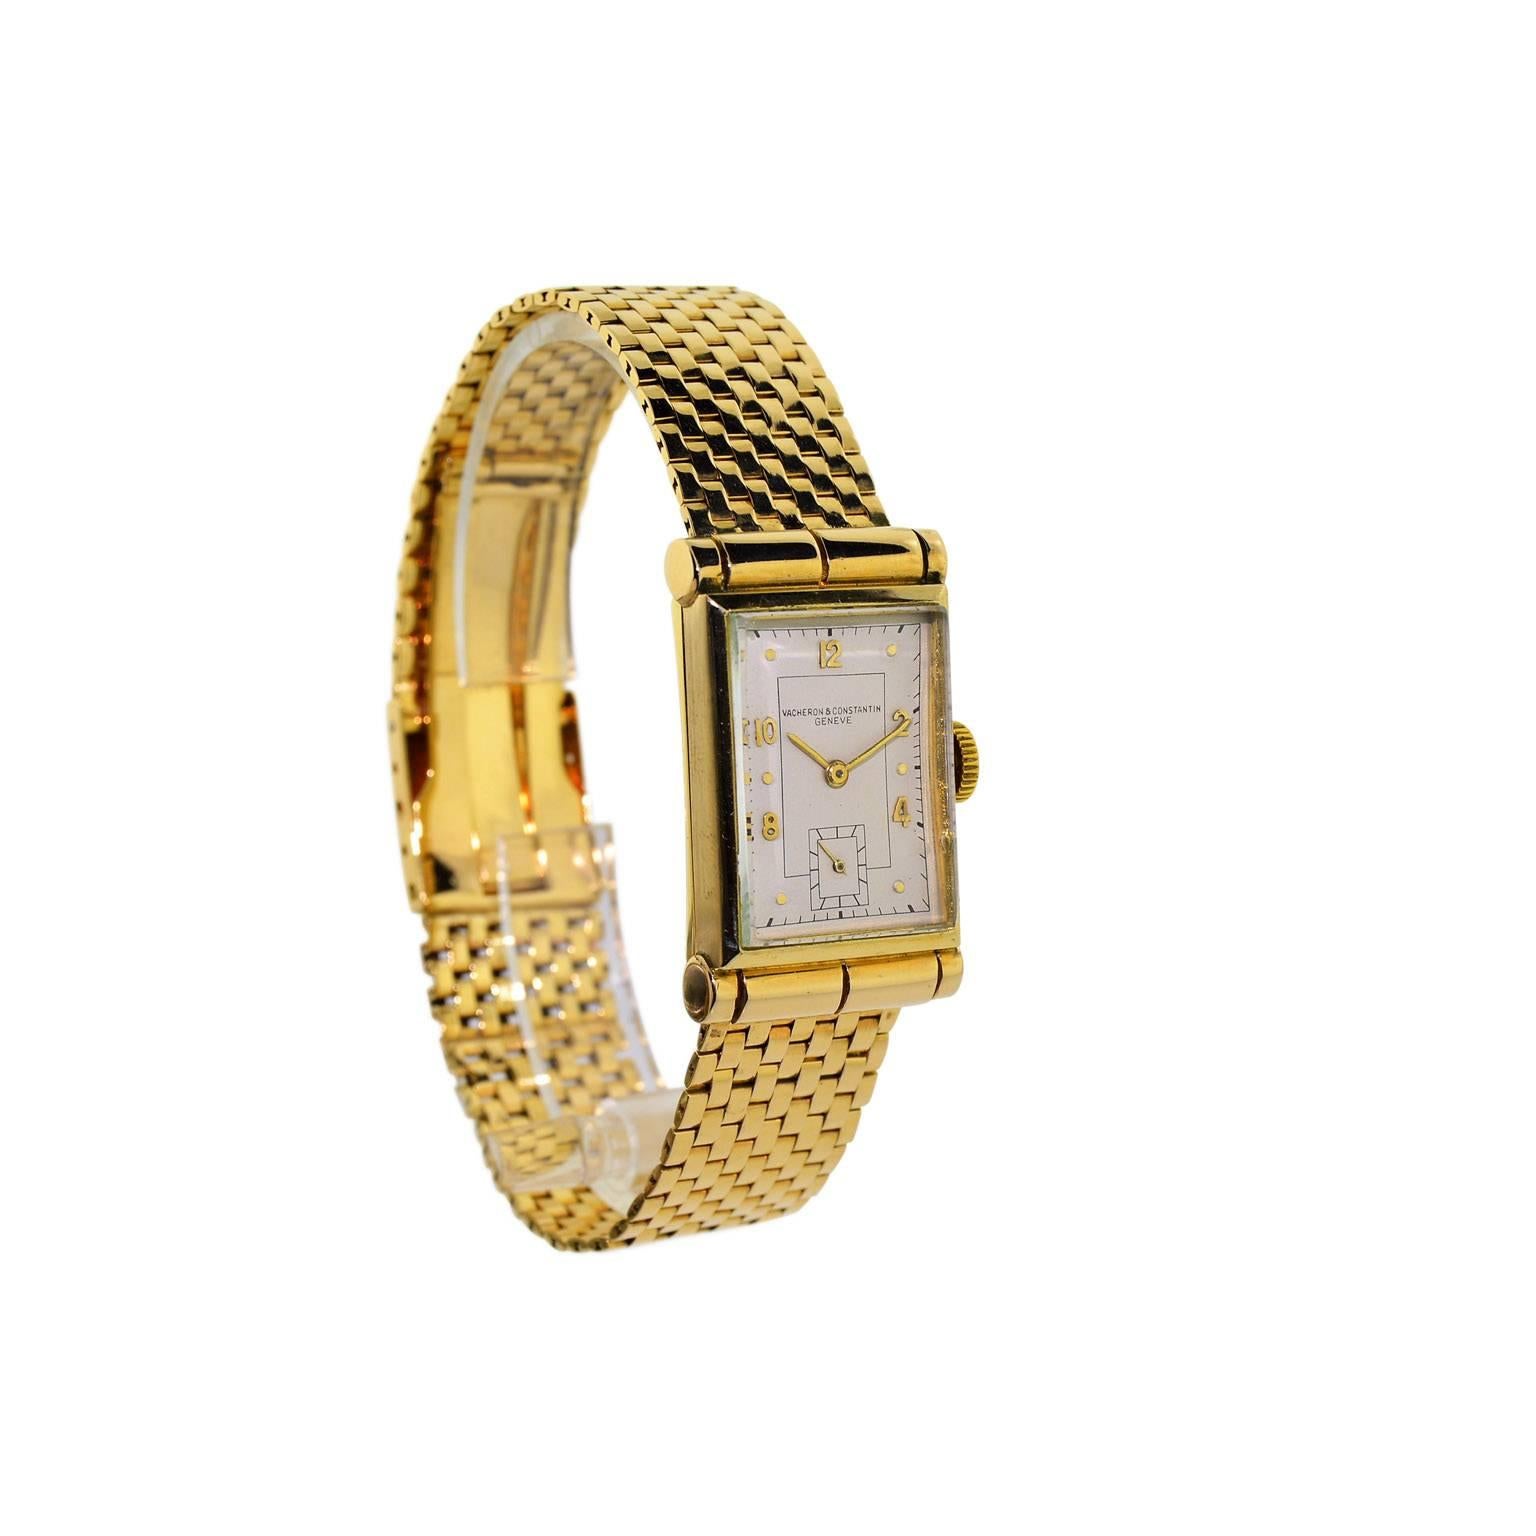 FACTORY / HOUSE: Vacheron Constantin
STYLE / REFERENCE:  Art Deco / Bracelet Watch
METAL / MATERIAL: 14Kt. Yellow Solid Gold
DIMENSIONS: 36 mm X 21 mm
CIRCA: 1940's 
MOVEMENT / CALIBER: Manual Winding /  17 Jewels 
DIAL / HANDS:  Silvered with